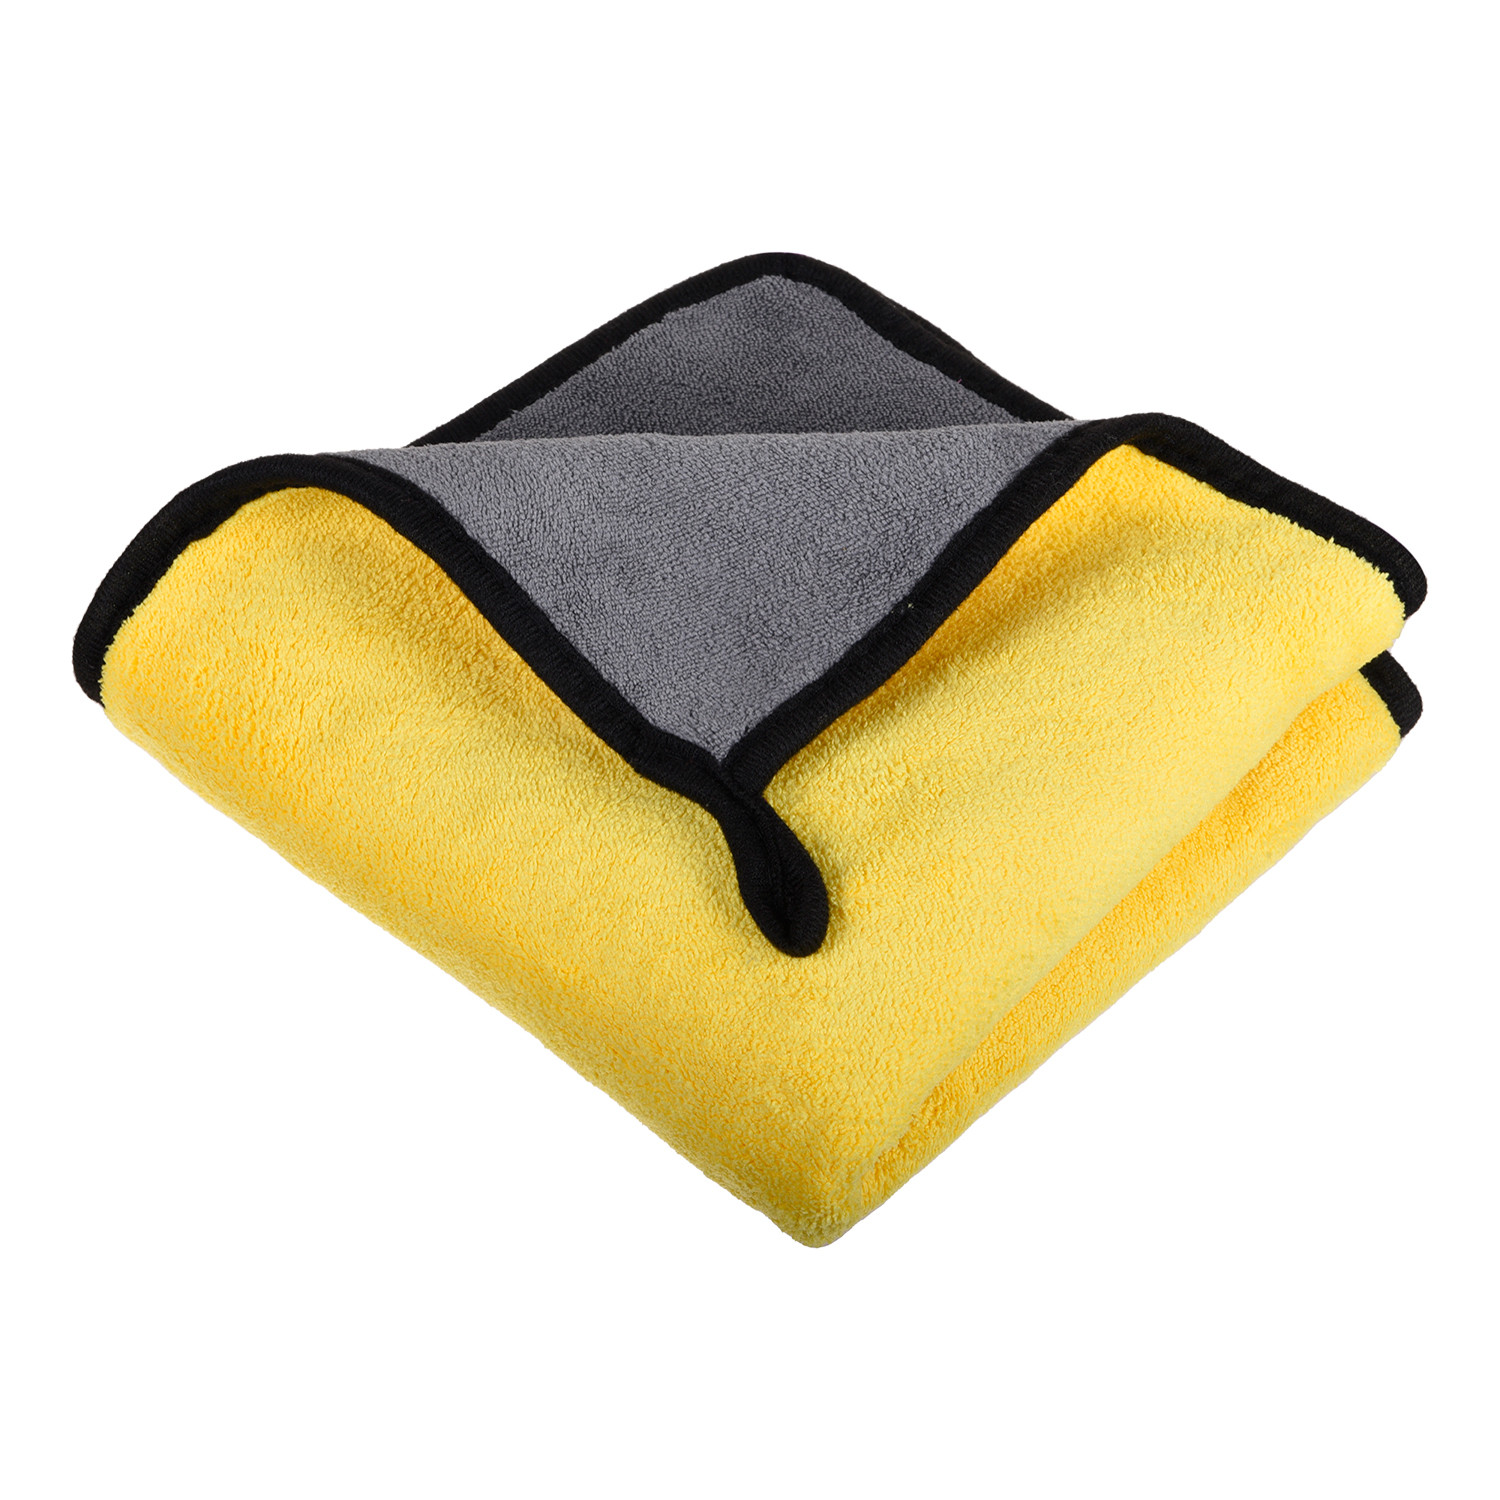 Kuber Industries Cleaning Towel | Reusable Cleaning Cloths for Kitchen | Duster Towel for Home Cleaning | 400 GSM Cleaning Cloth Towel with Hanging Loop | 40x60 | Pack of 3 | Multi